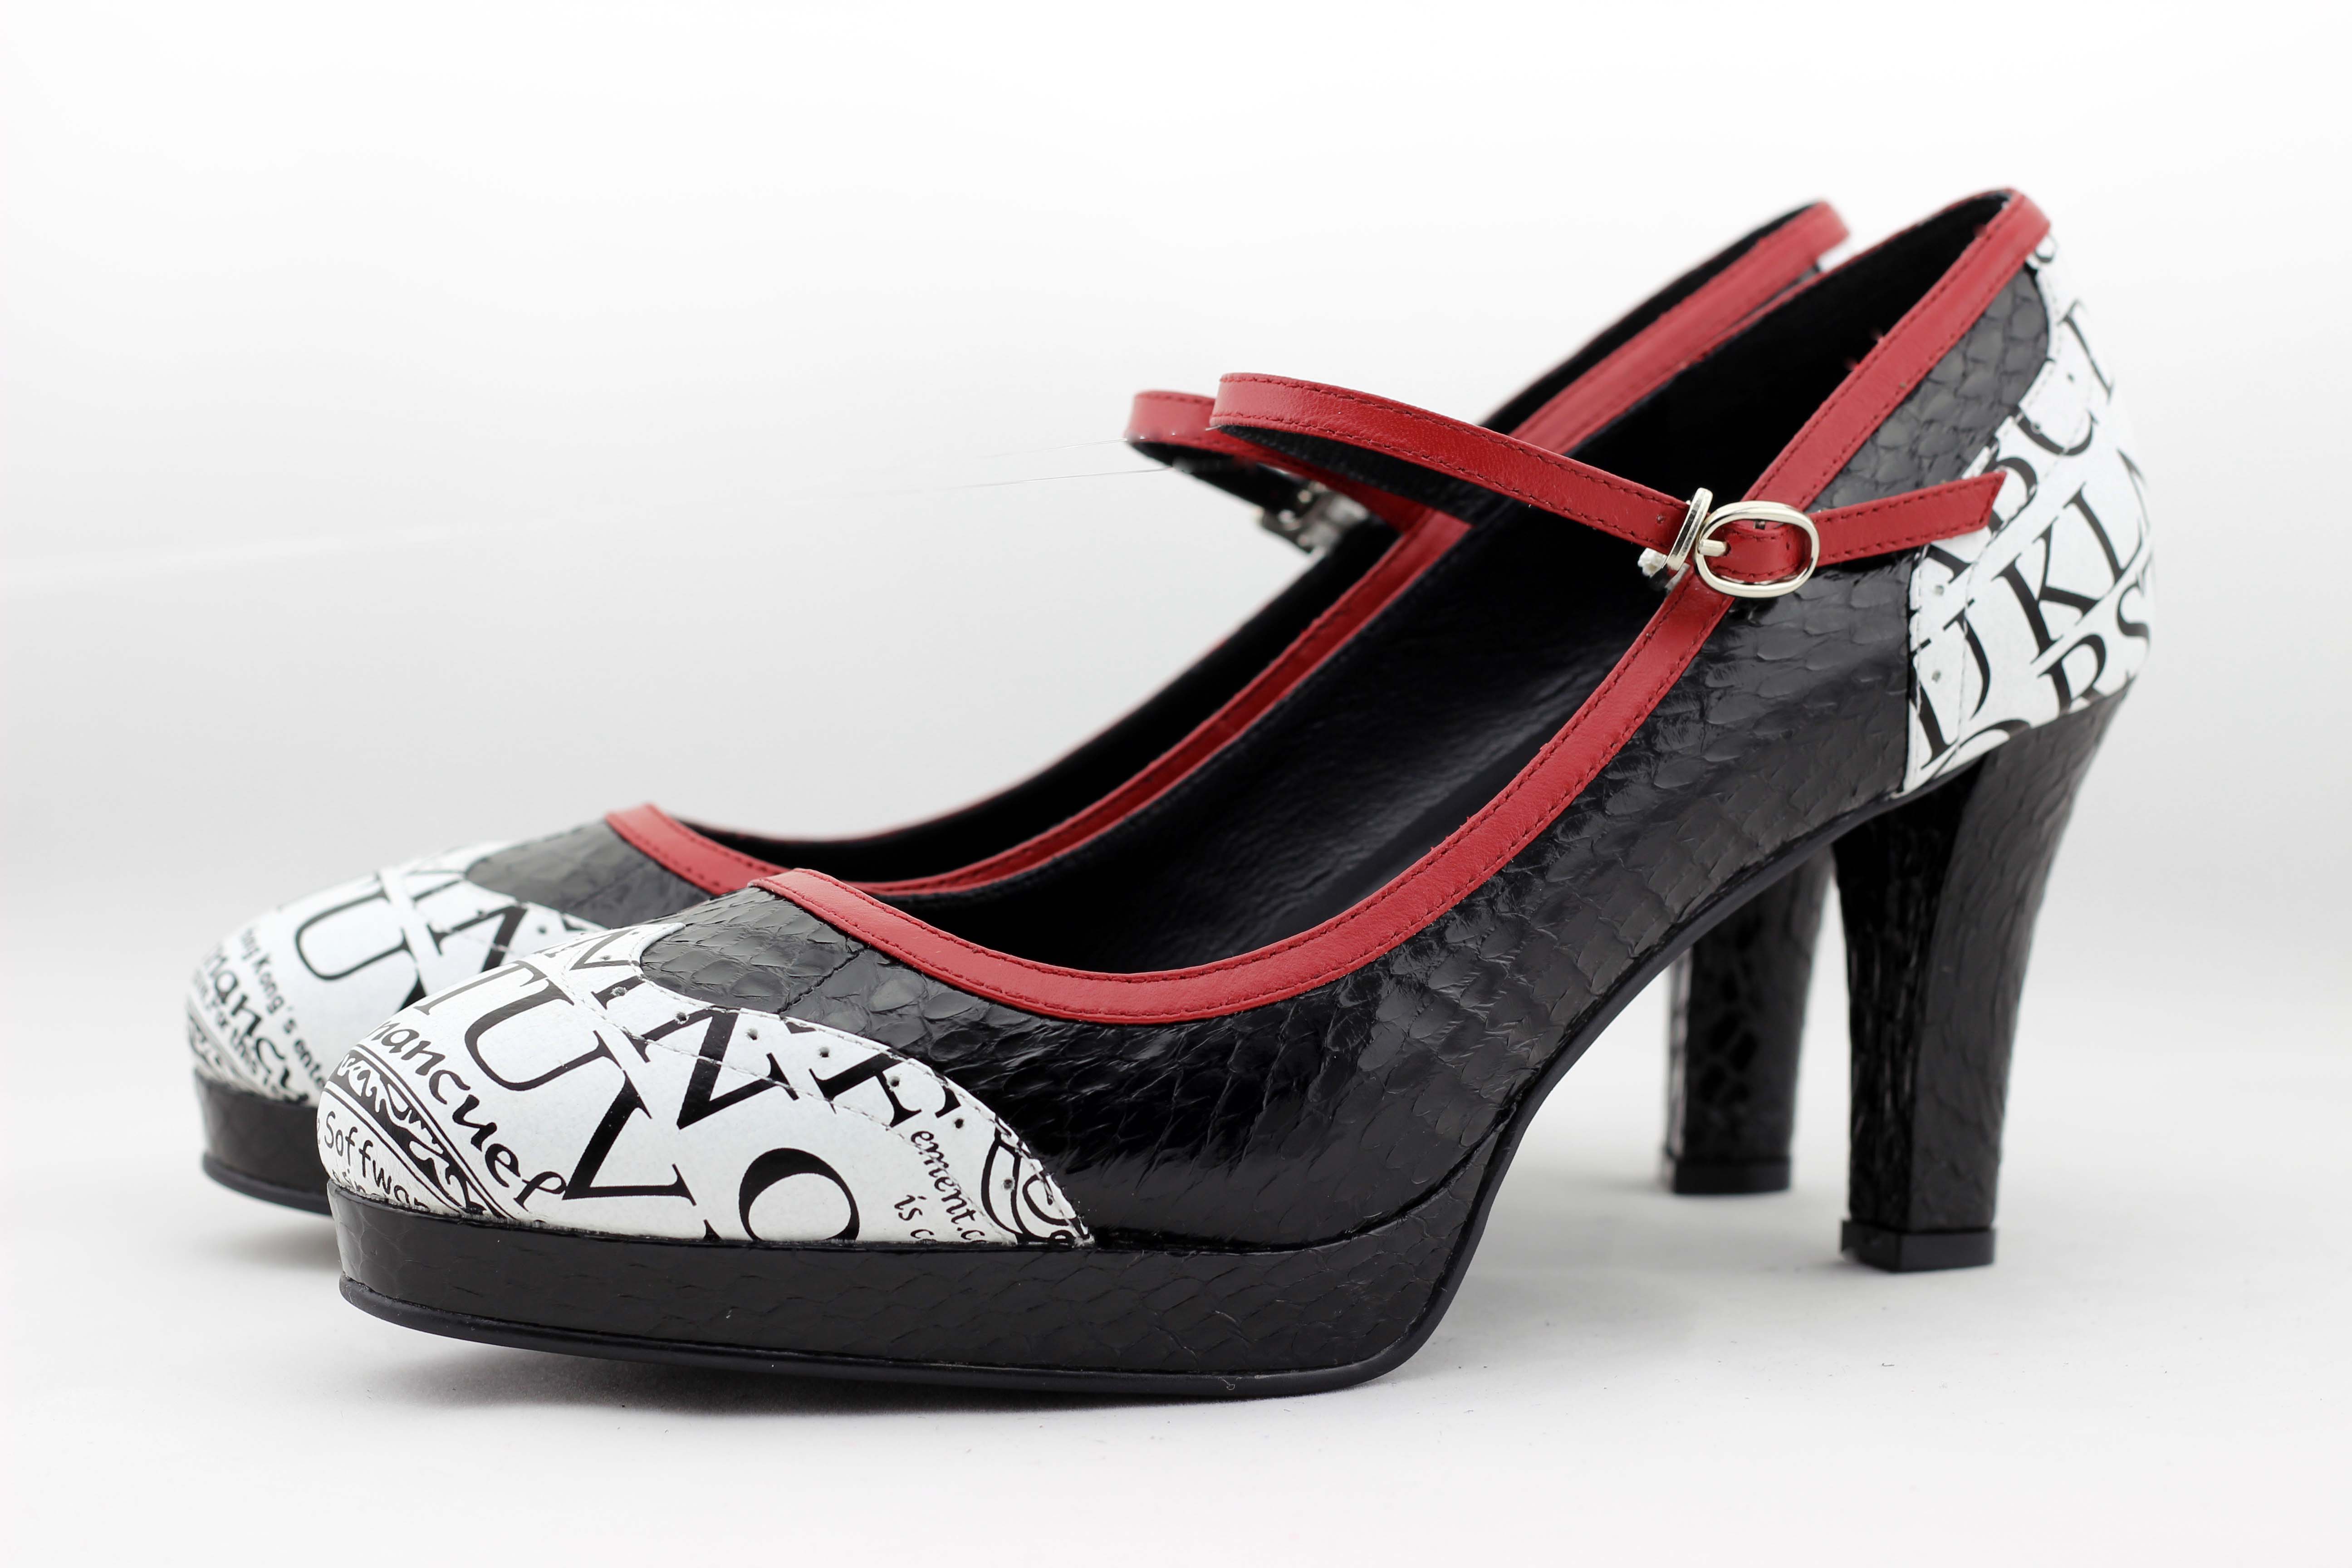 How Shoes of Prey Lets You Design the Shoe of Your Dreams - GeekDad